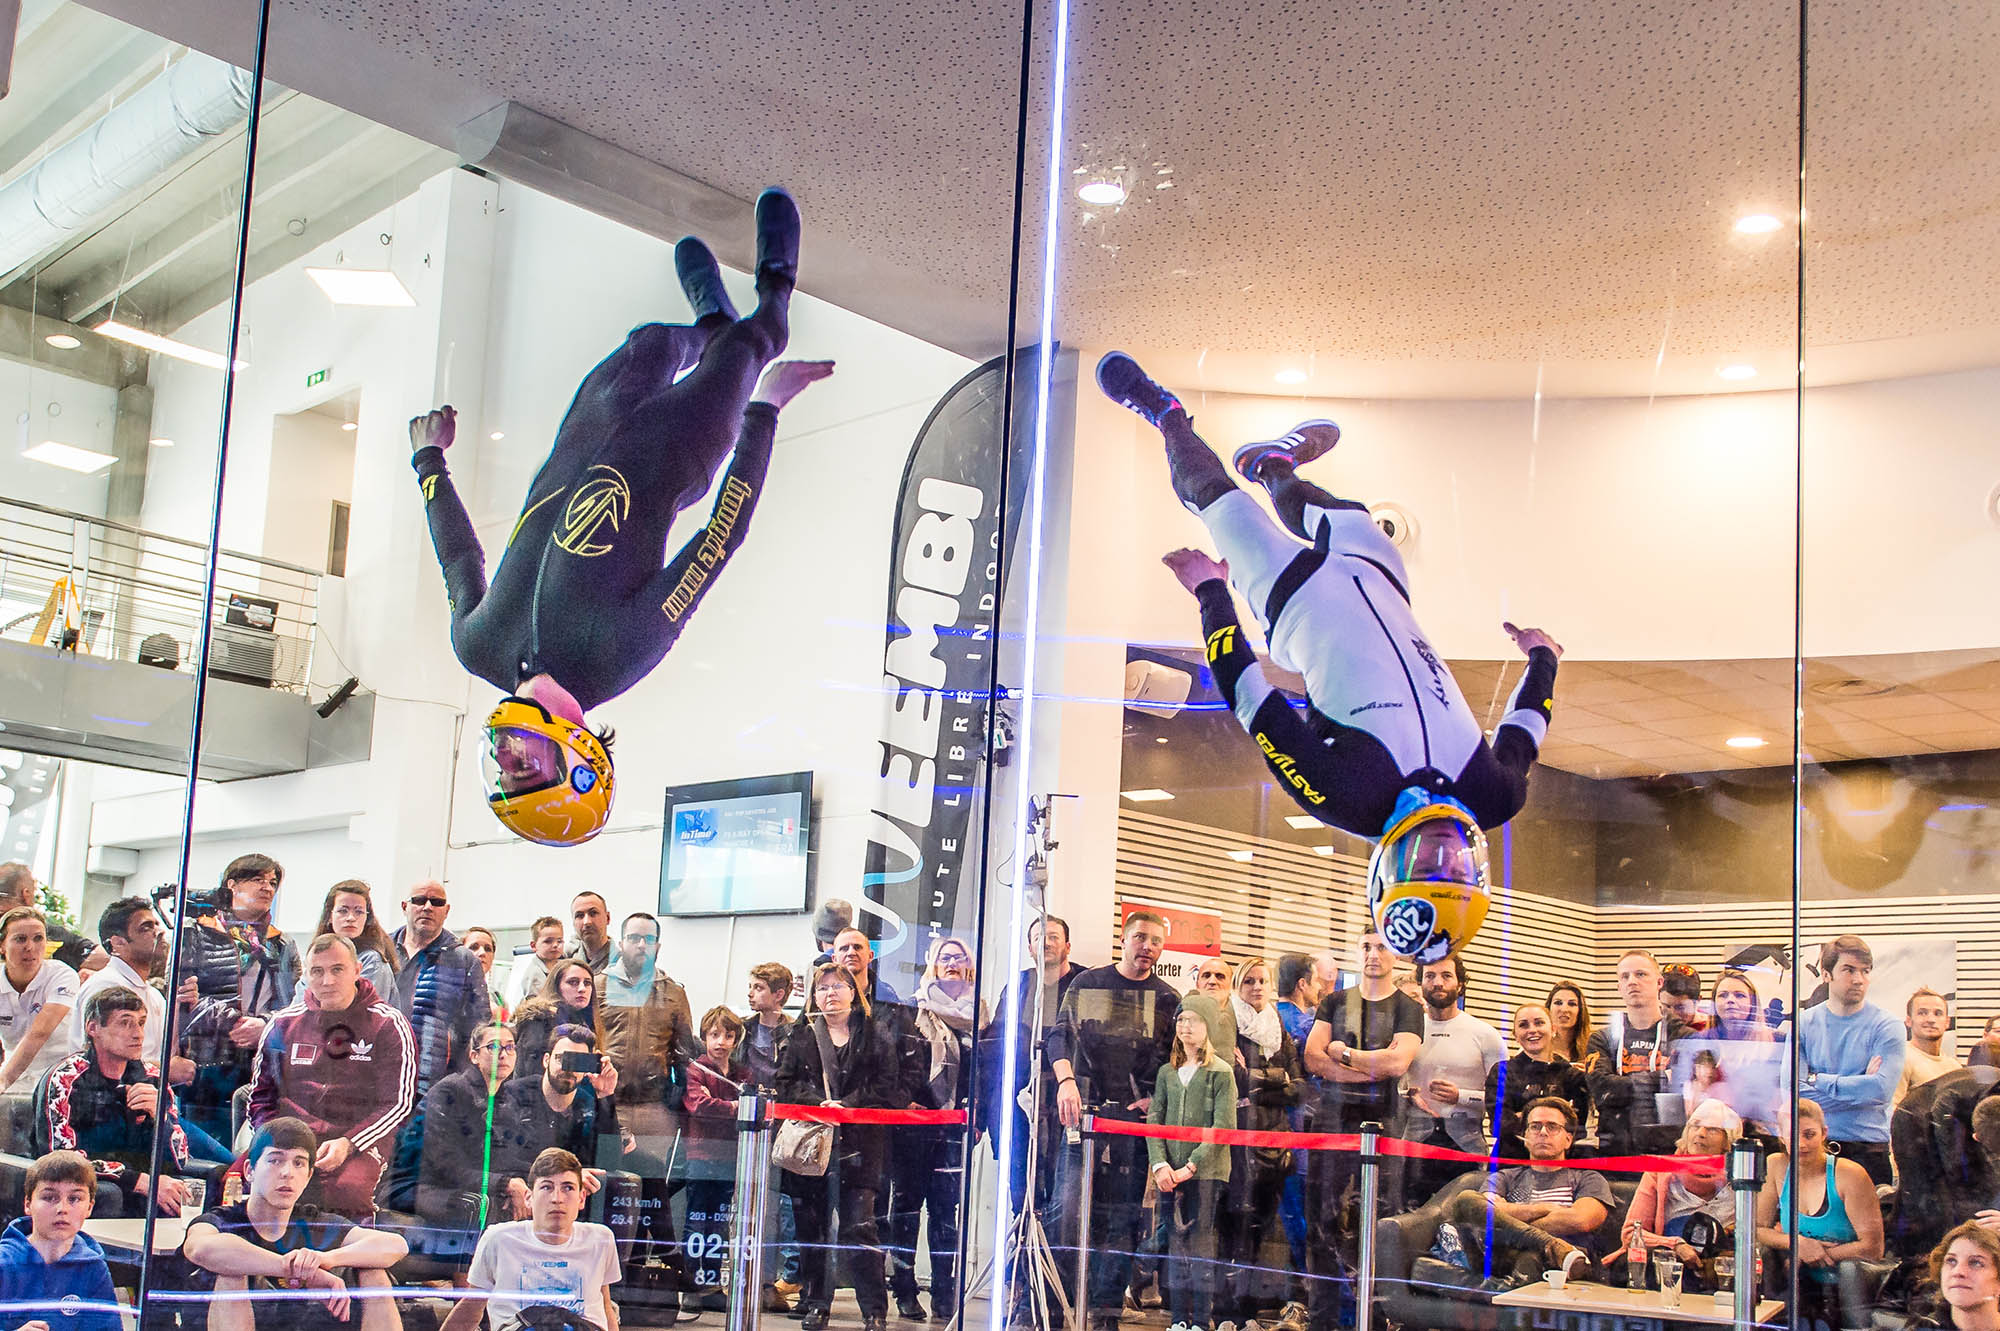 Lift off for the FAI World Indoor Skydiving Championships 2019 in Lille ...